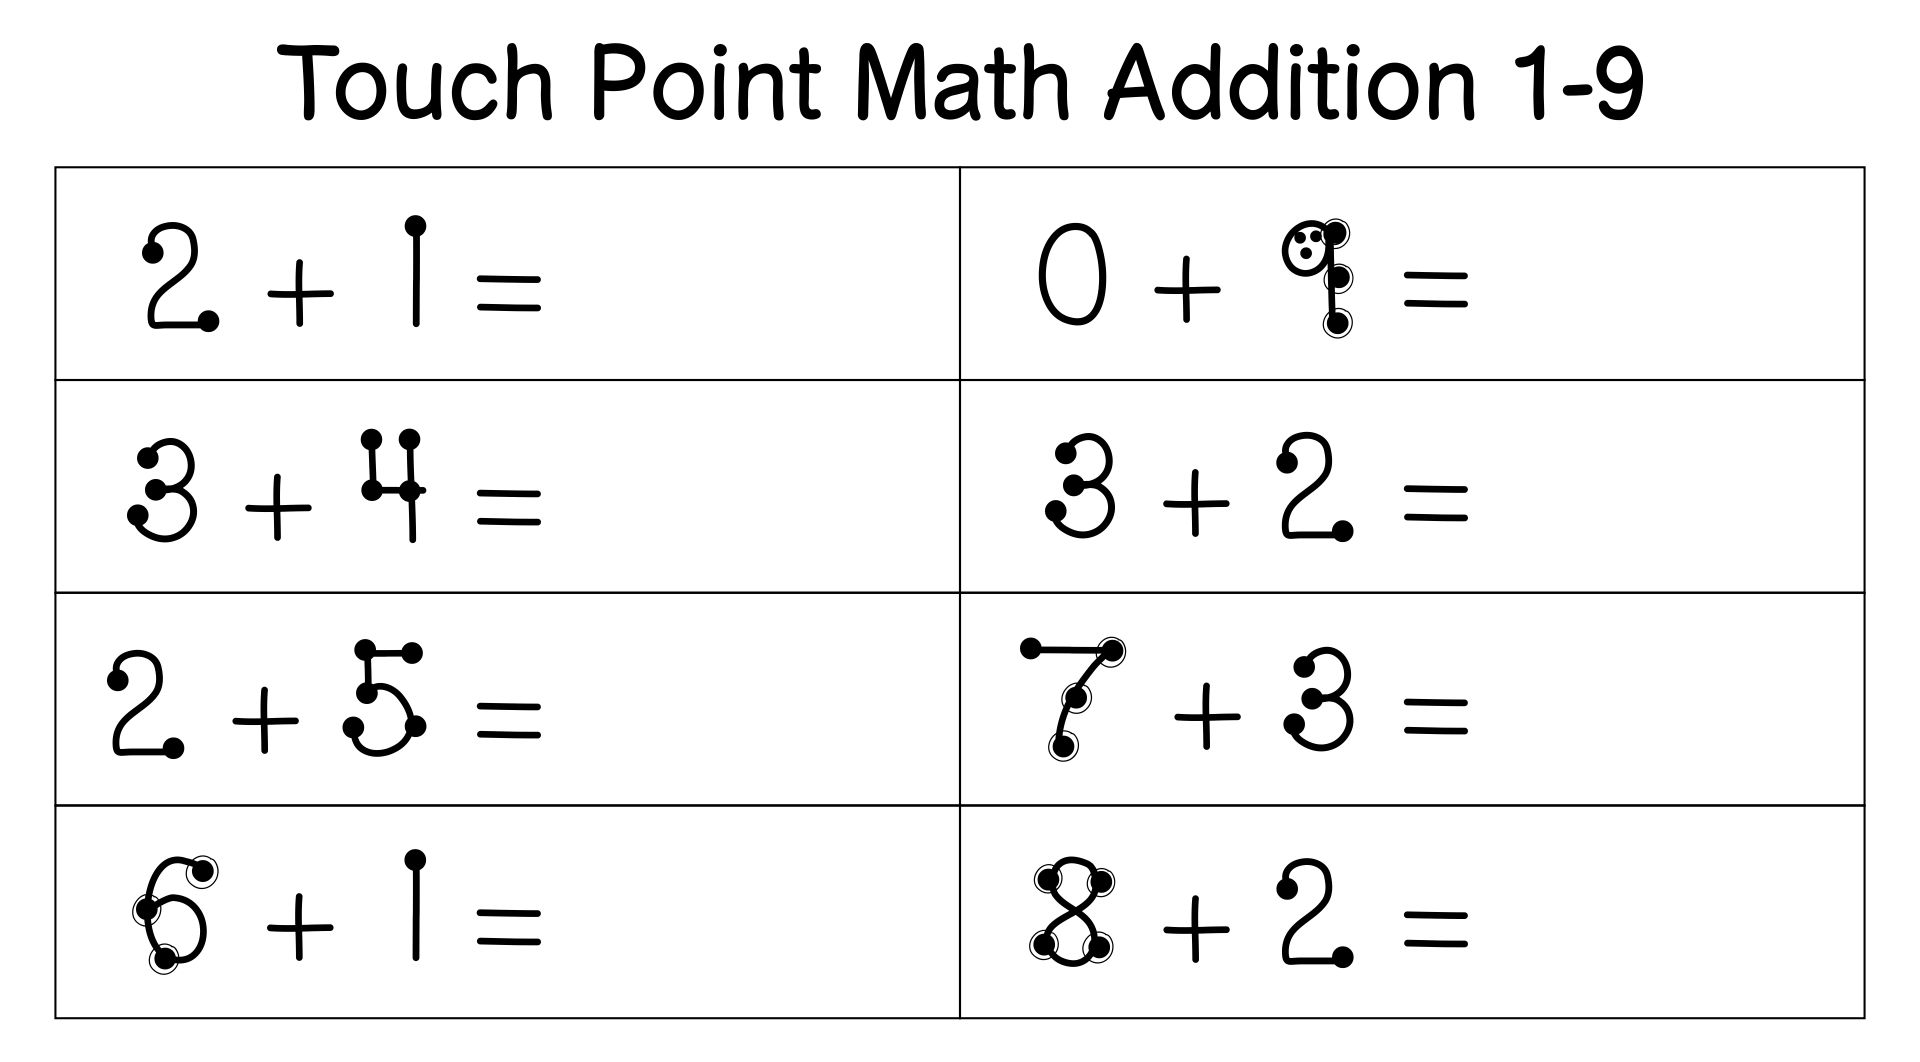 Touch Point Math Addition 1-9 Worksheets